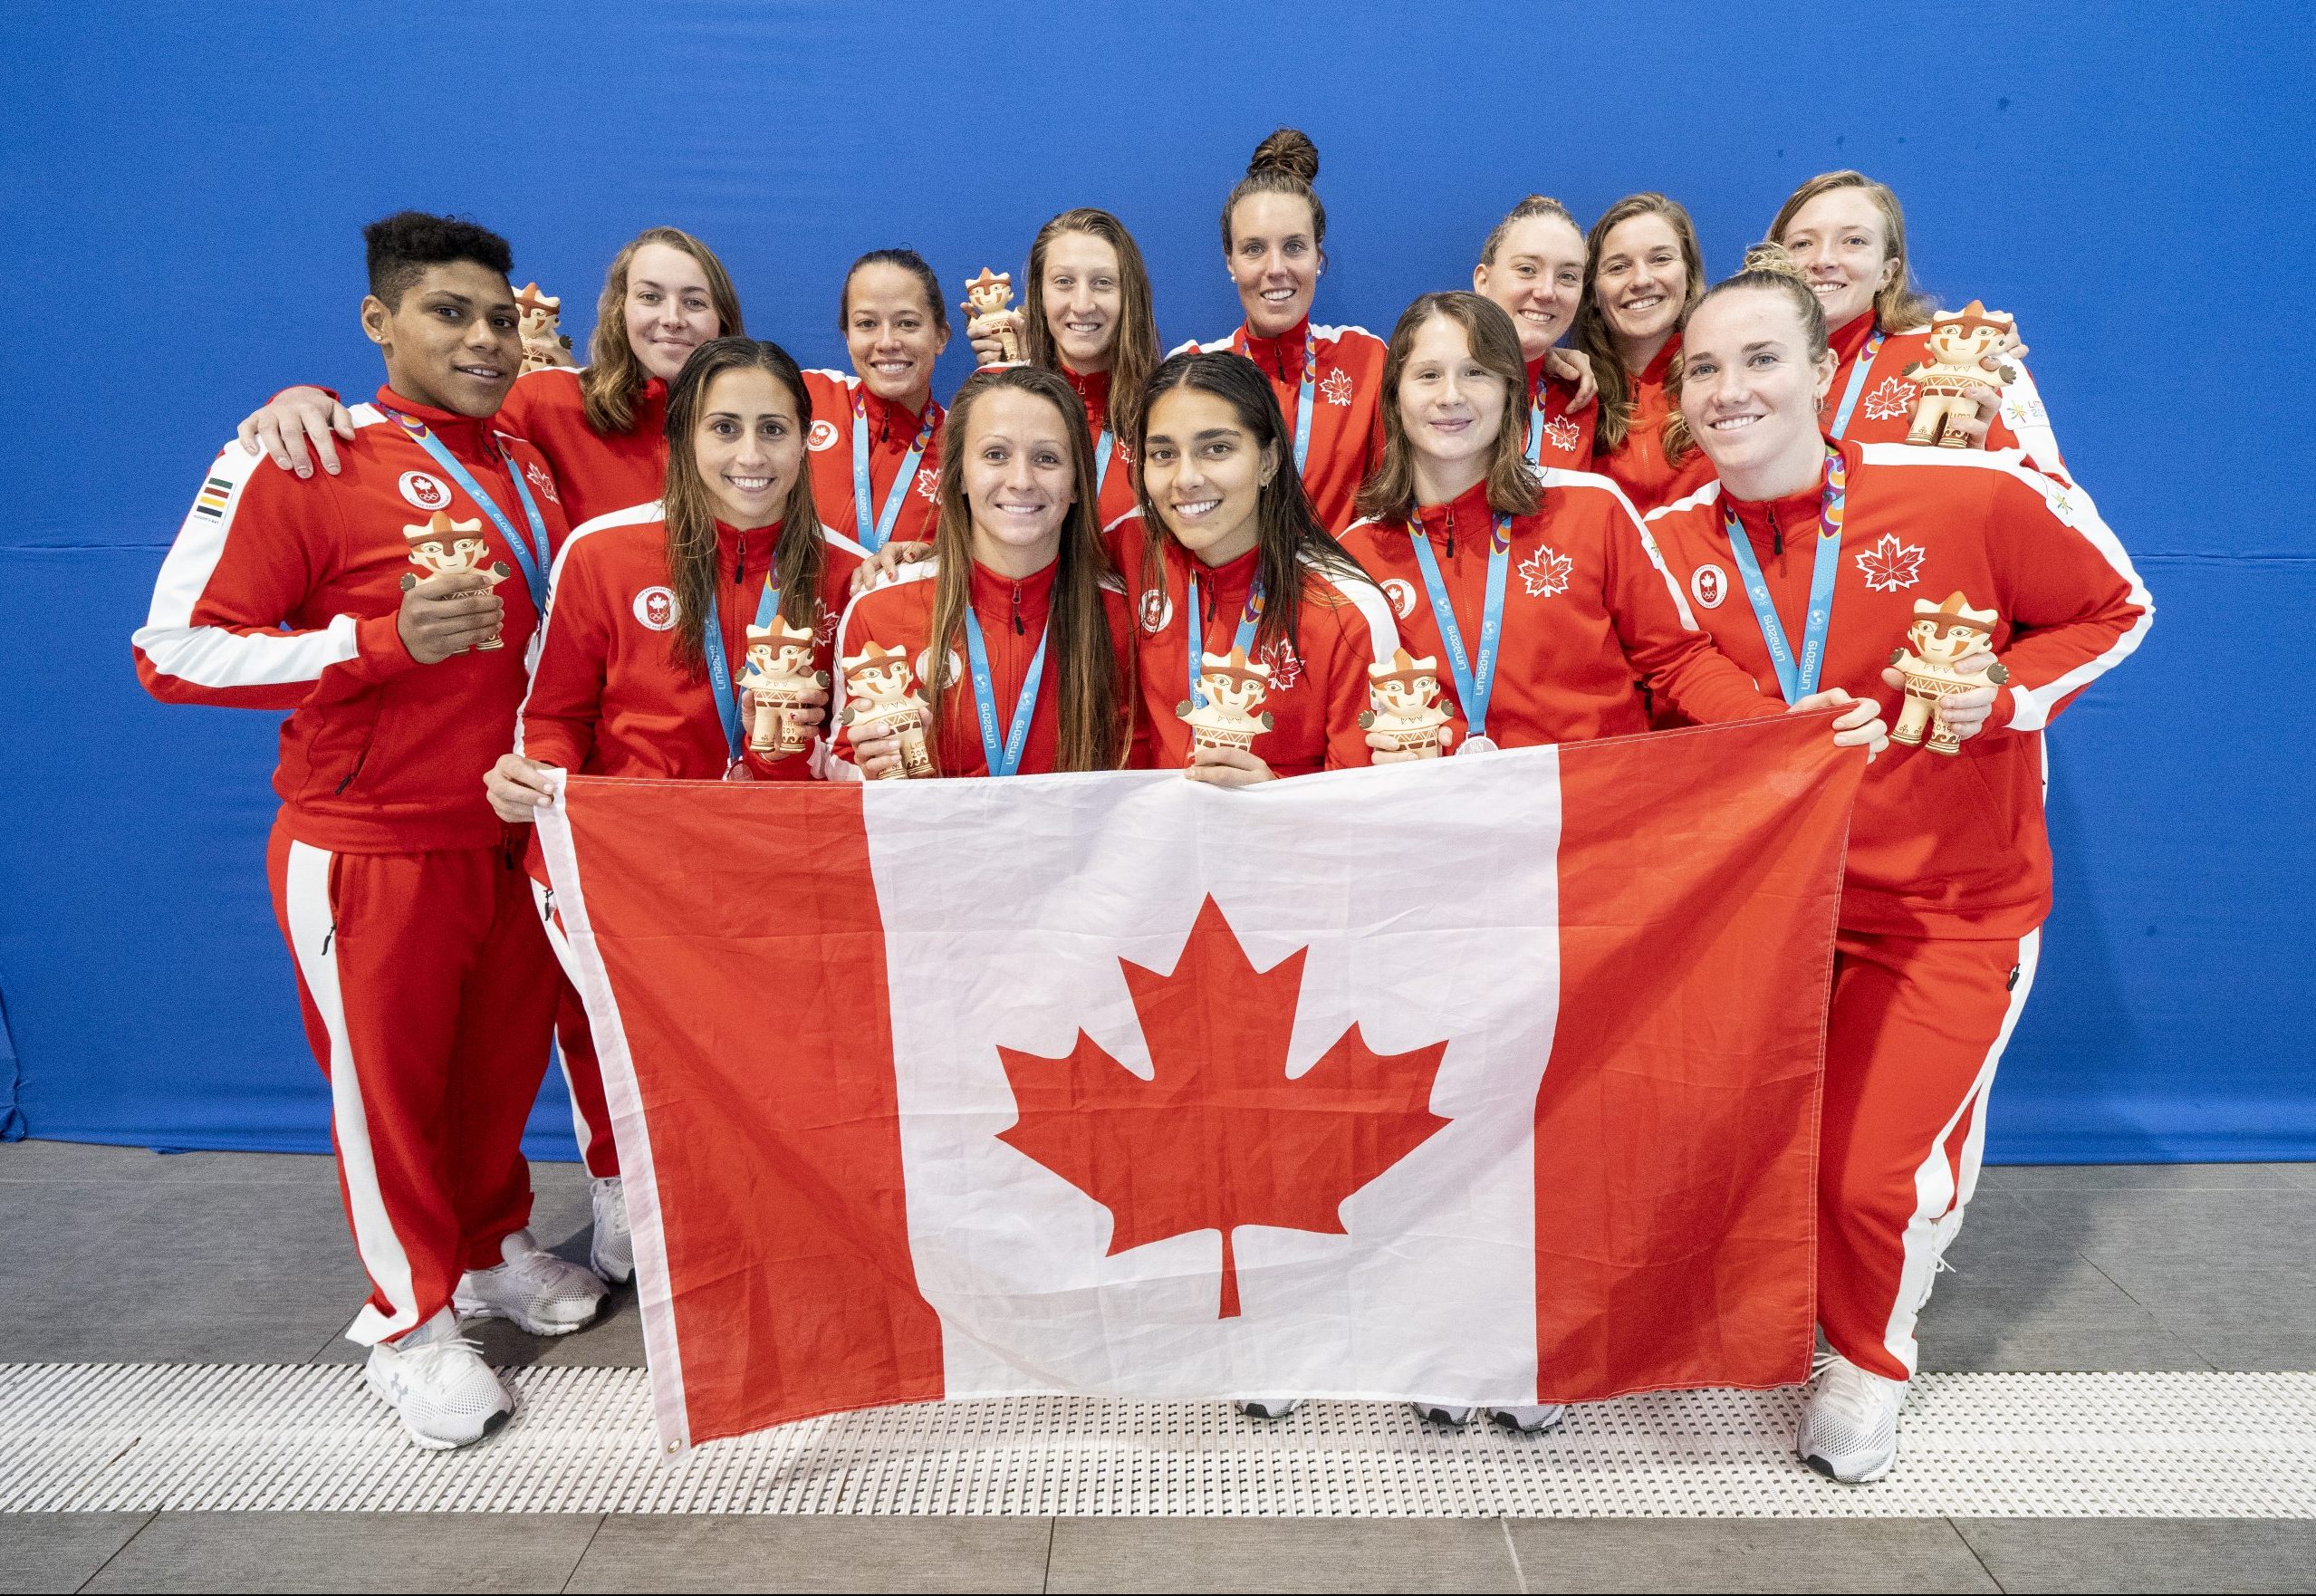 Canada's women's water polo team posed with the Canadian flag